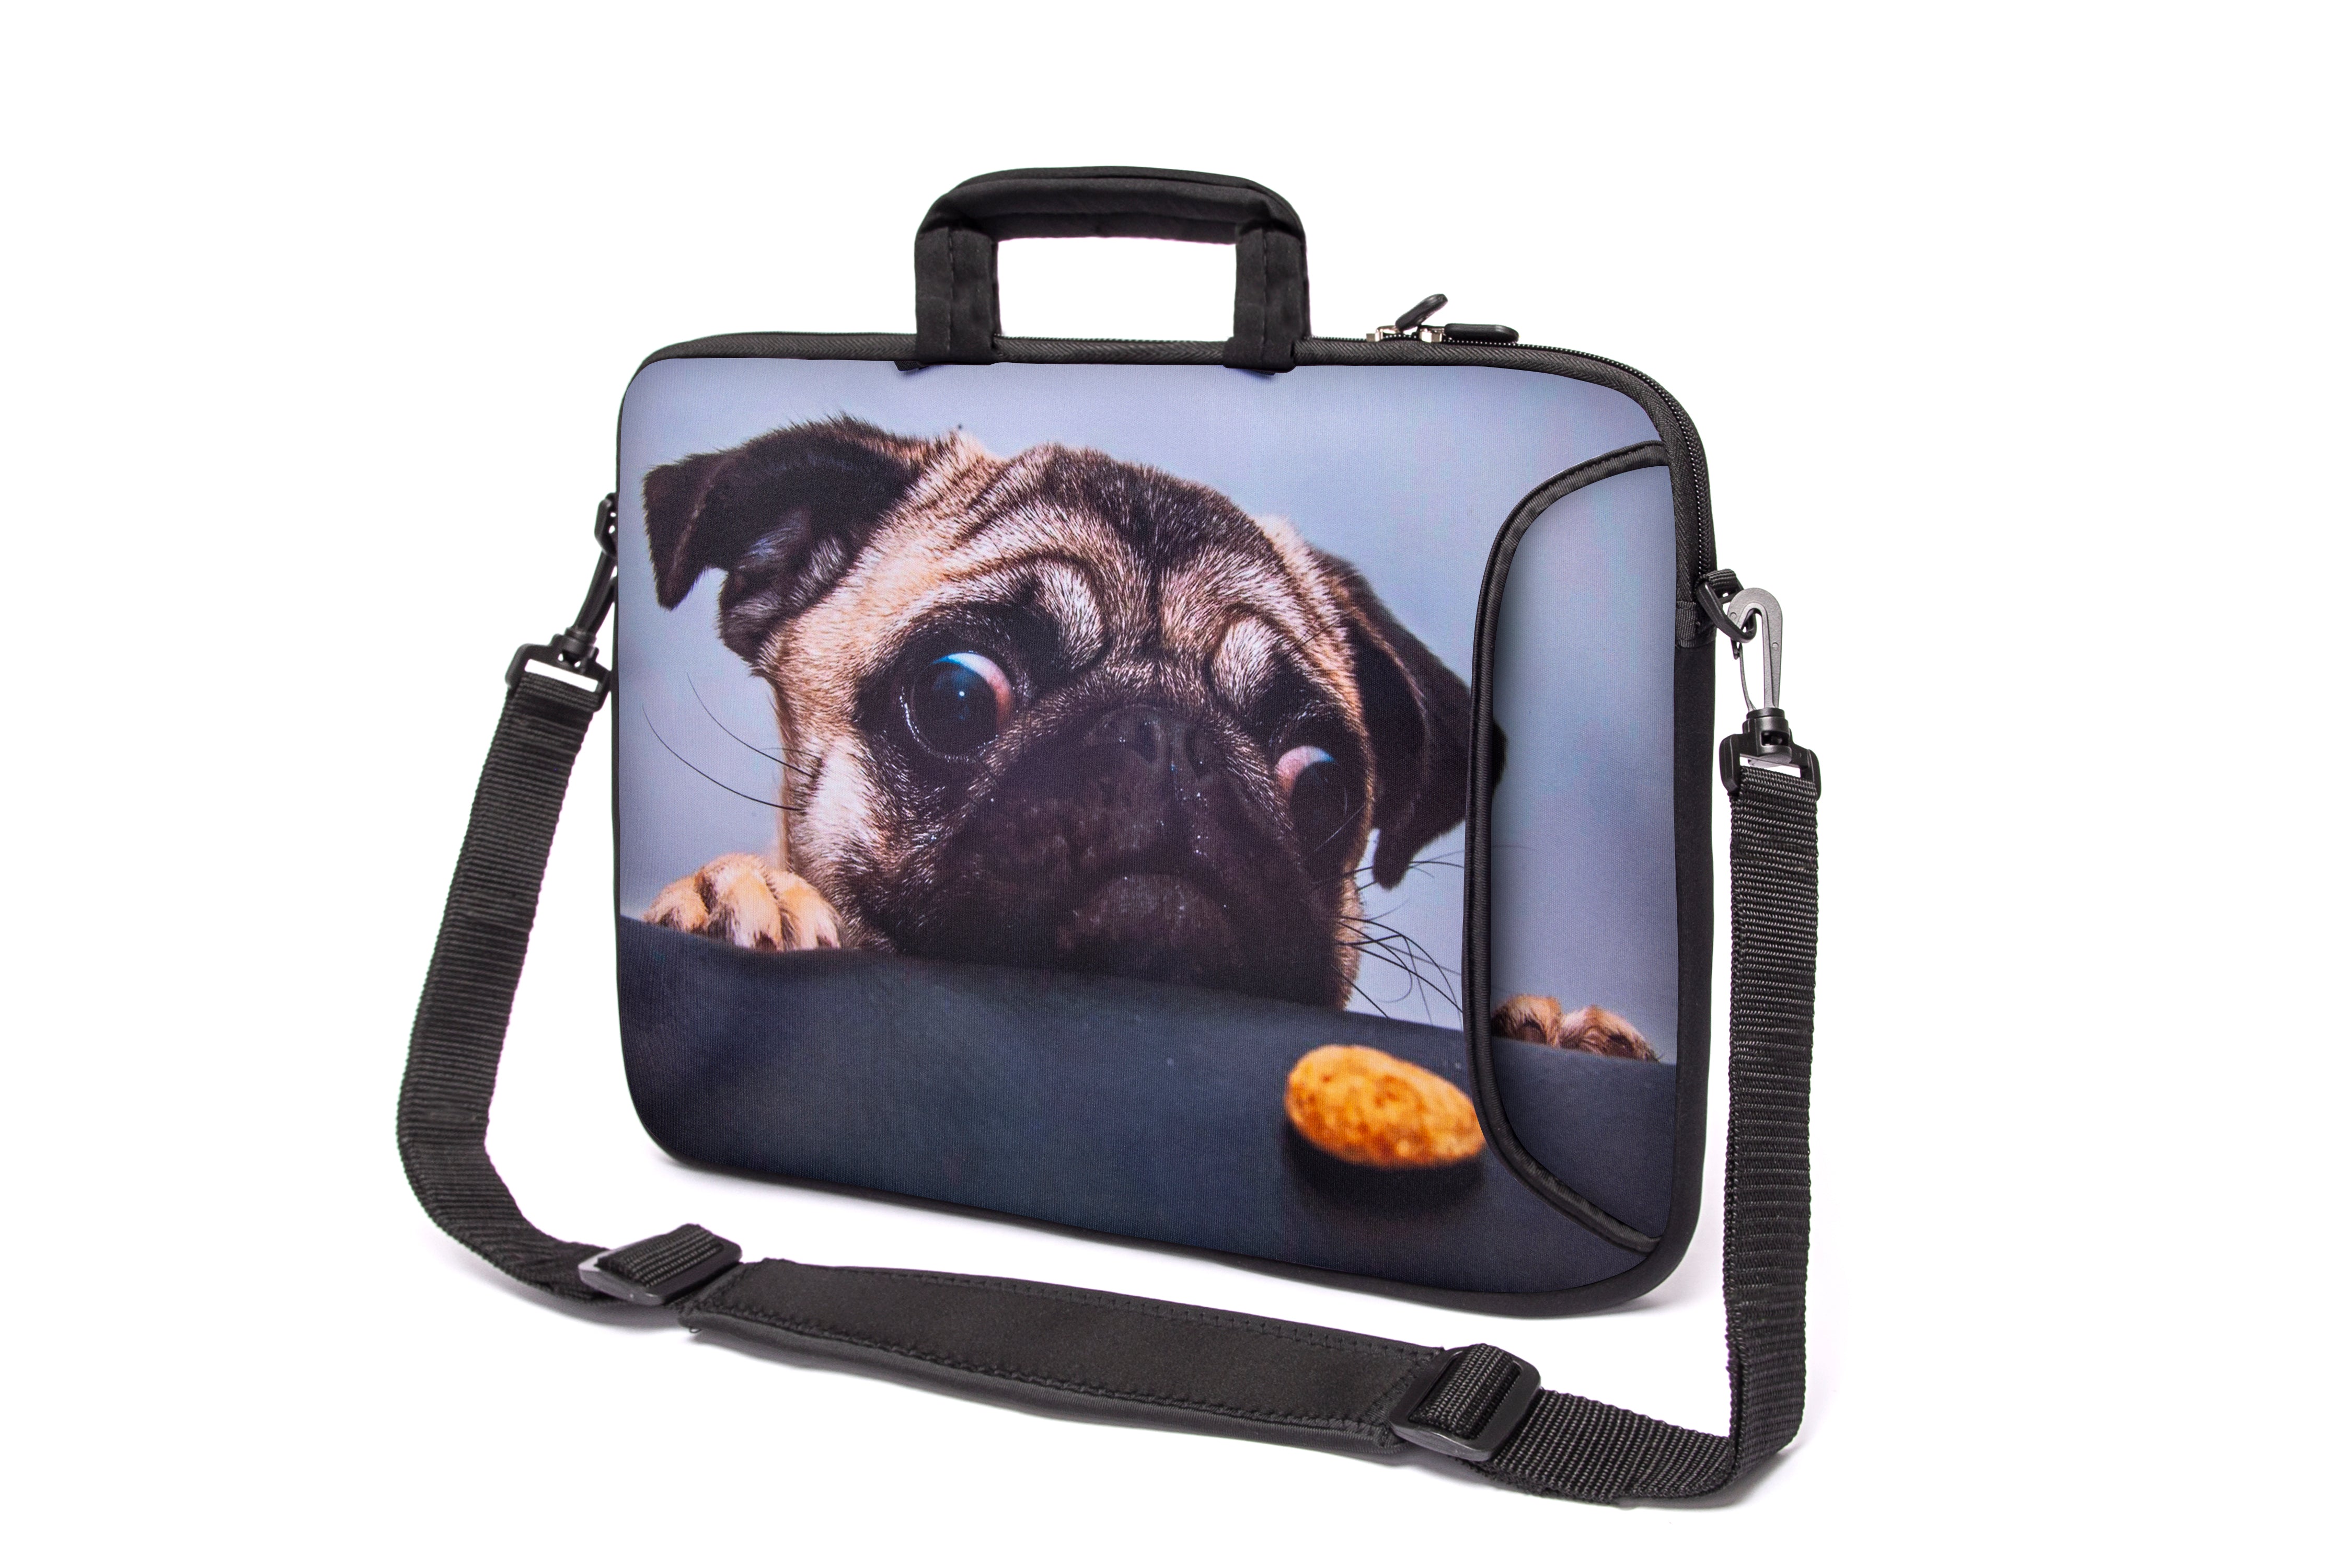 17"- 17.3" (inch) LAPTOP BAG/CASE WITH HANDLE & STRAP, NEOPRENE MADE FOR LAPTOPS/NOTEBOOKS, ZIPPED*MOPS*